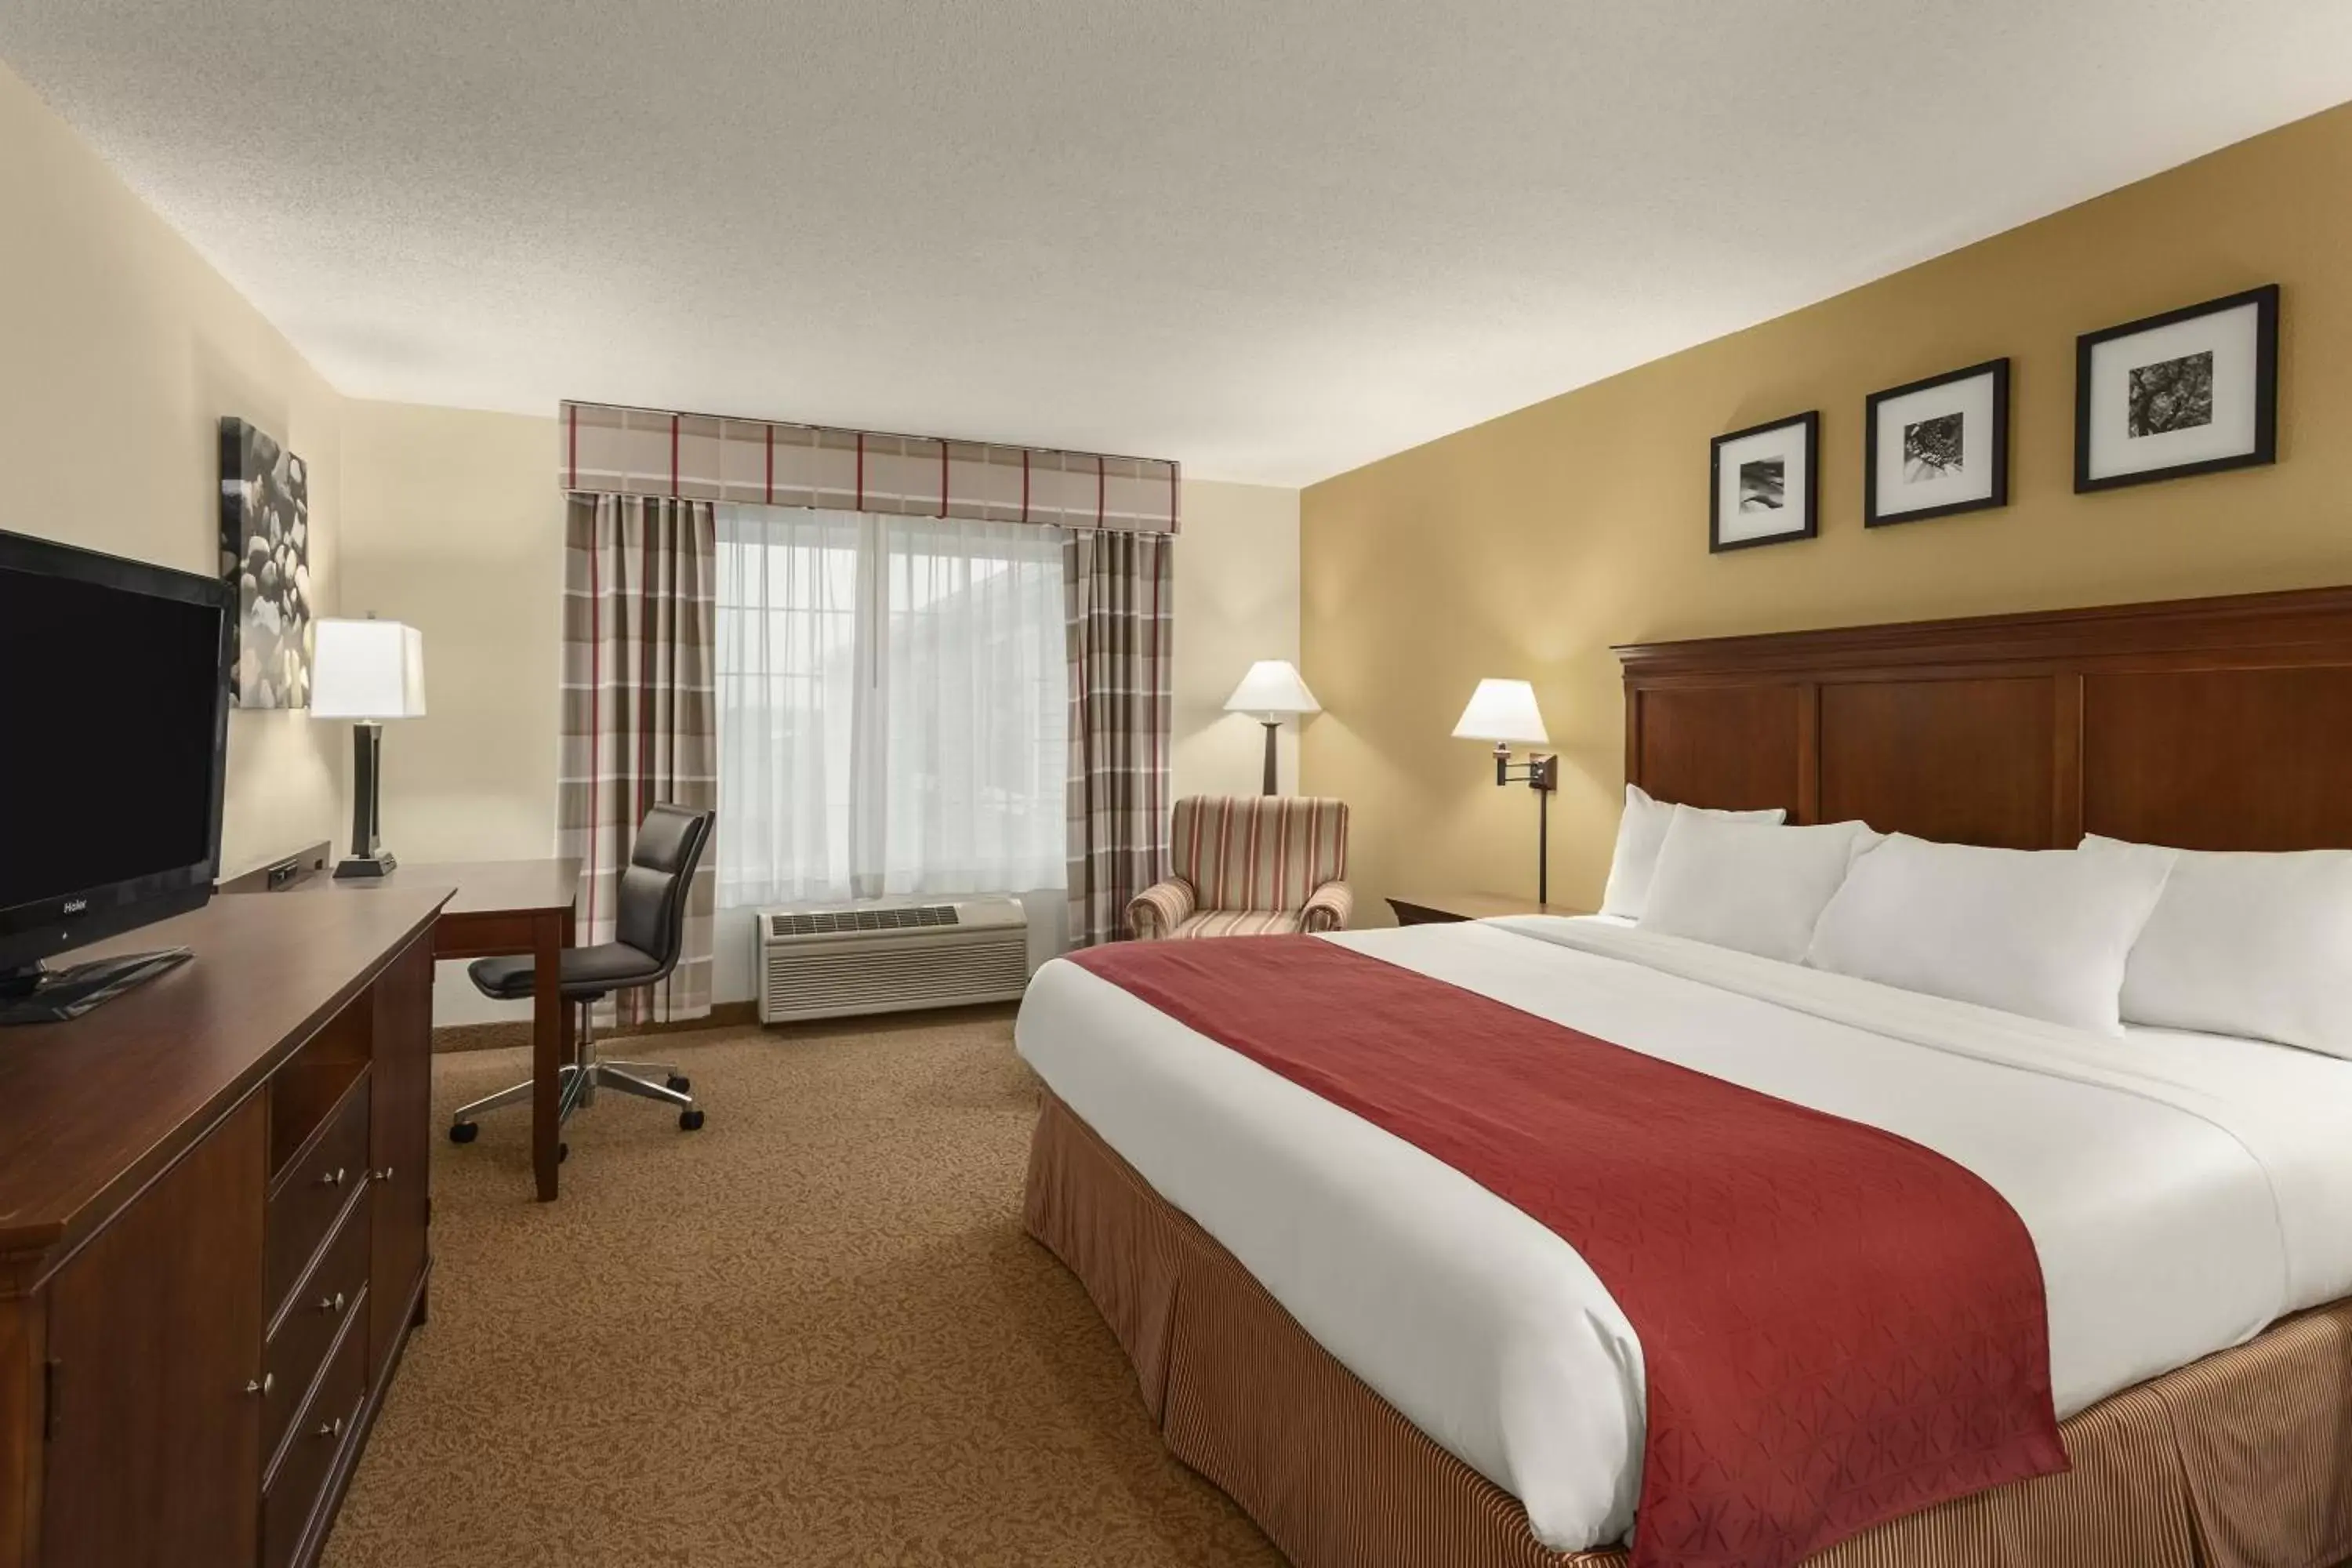 Bed, Room Photo in Country Inn & Suites by Radisson, Ames, IA